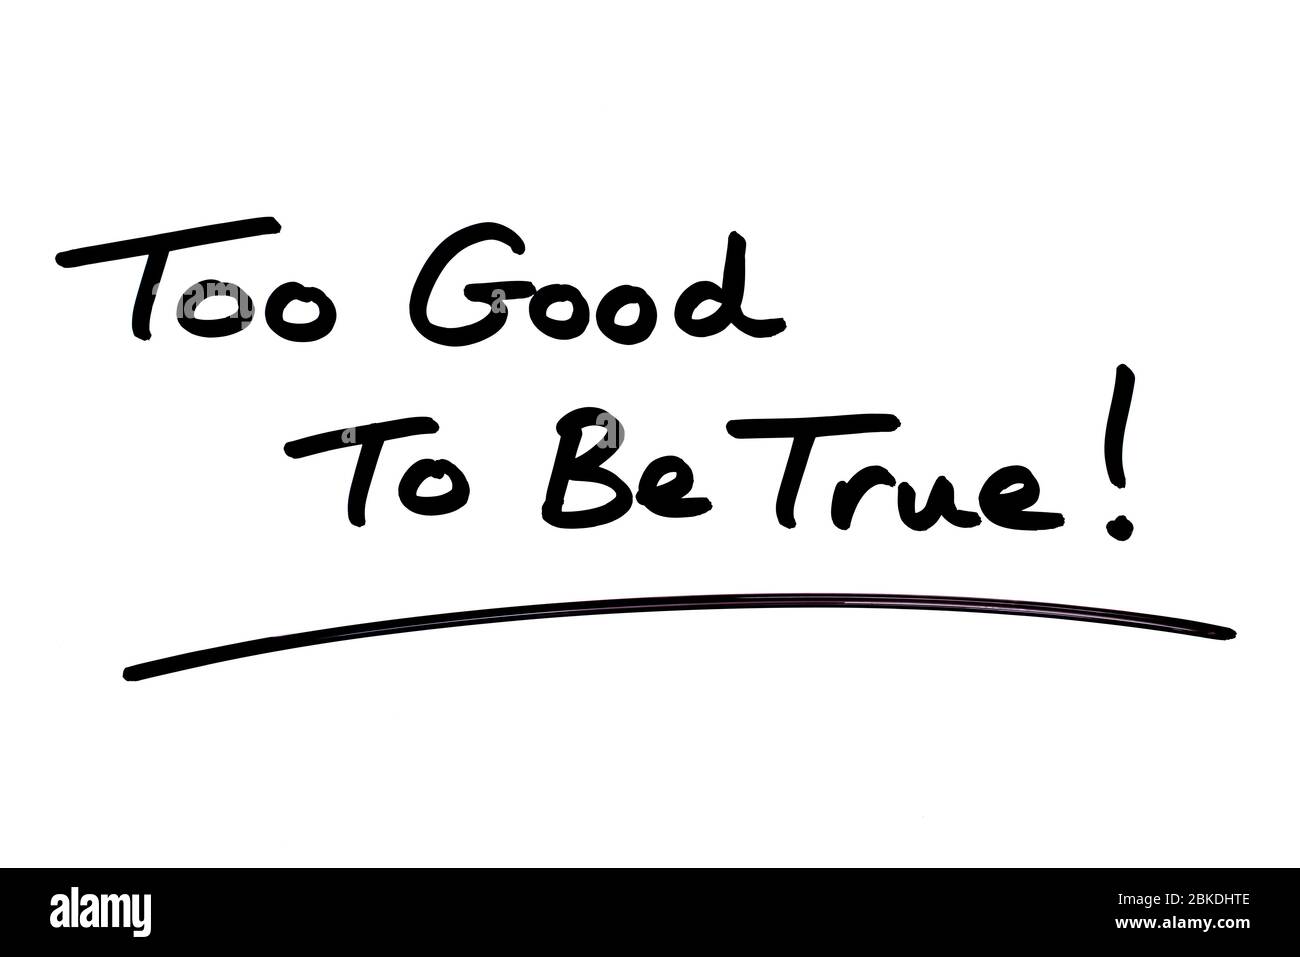 Too Good To Be True! handwritten on a white background. Stock Photo